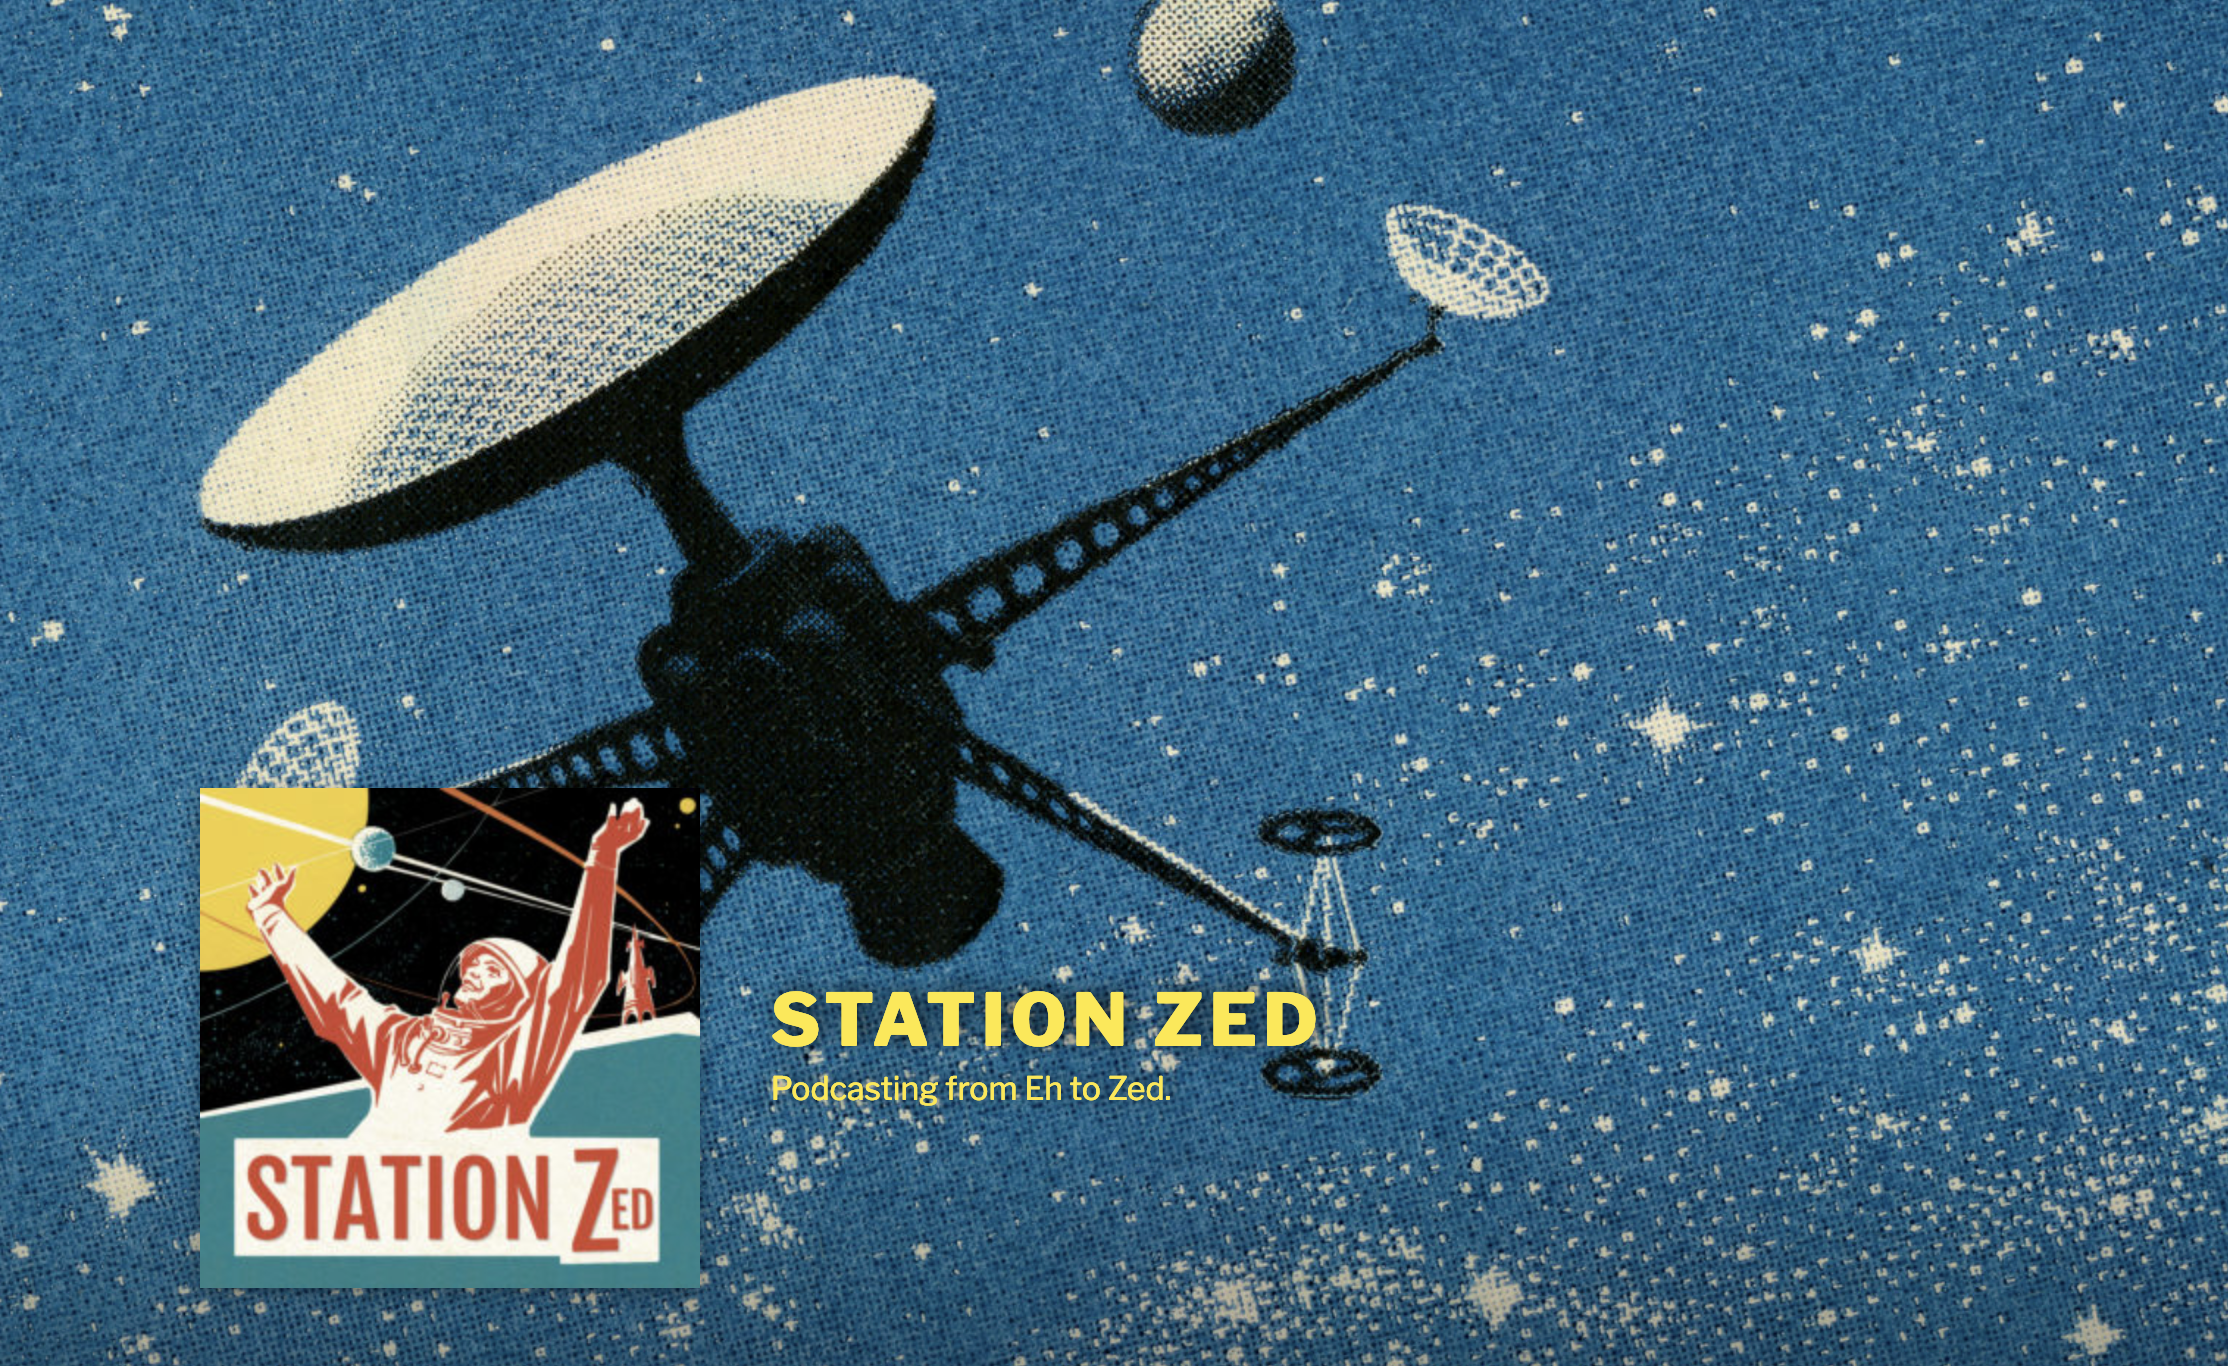 a blue 60's style space background with a black satellite floating around and a small thumbnail of an astronaut reaching up next to yellow text reading 'Station Zed - Podcasting from Eh to Zed'